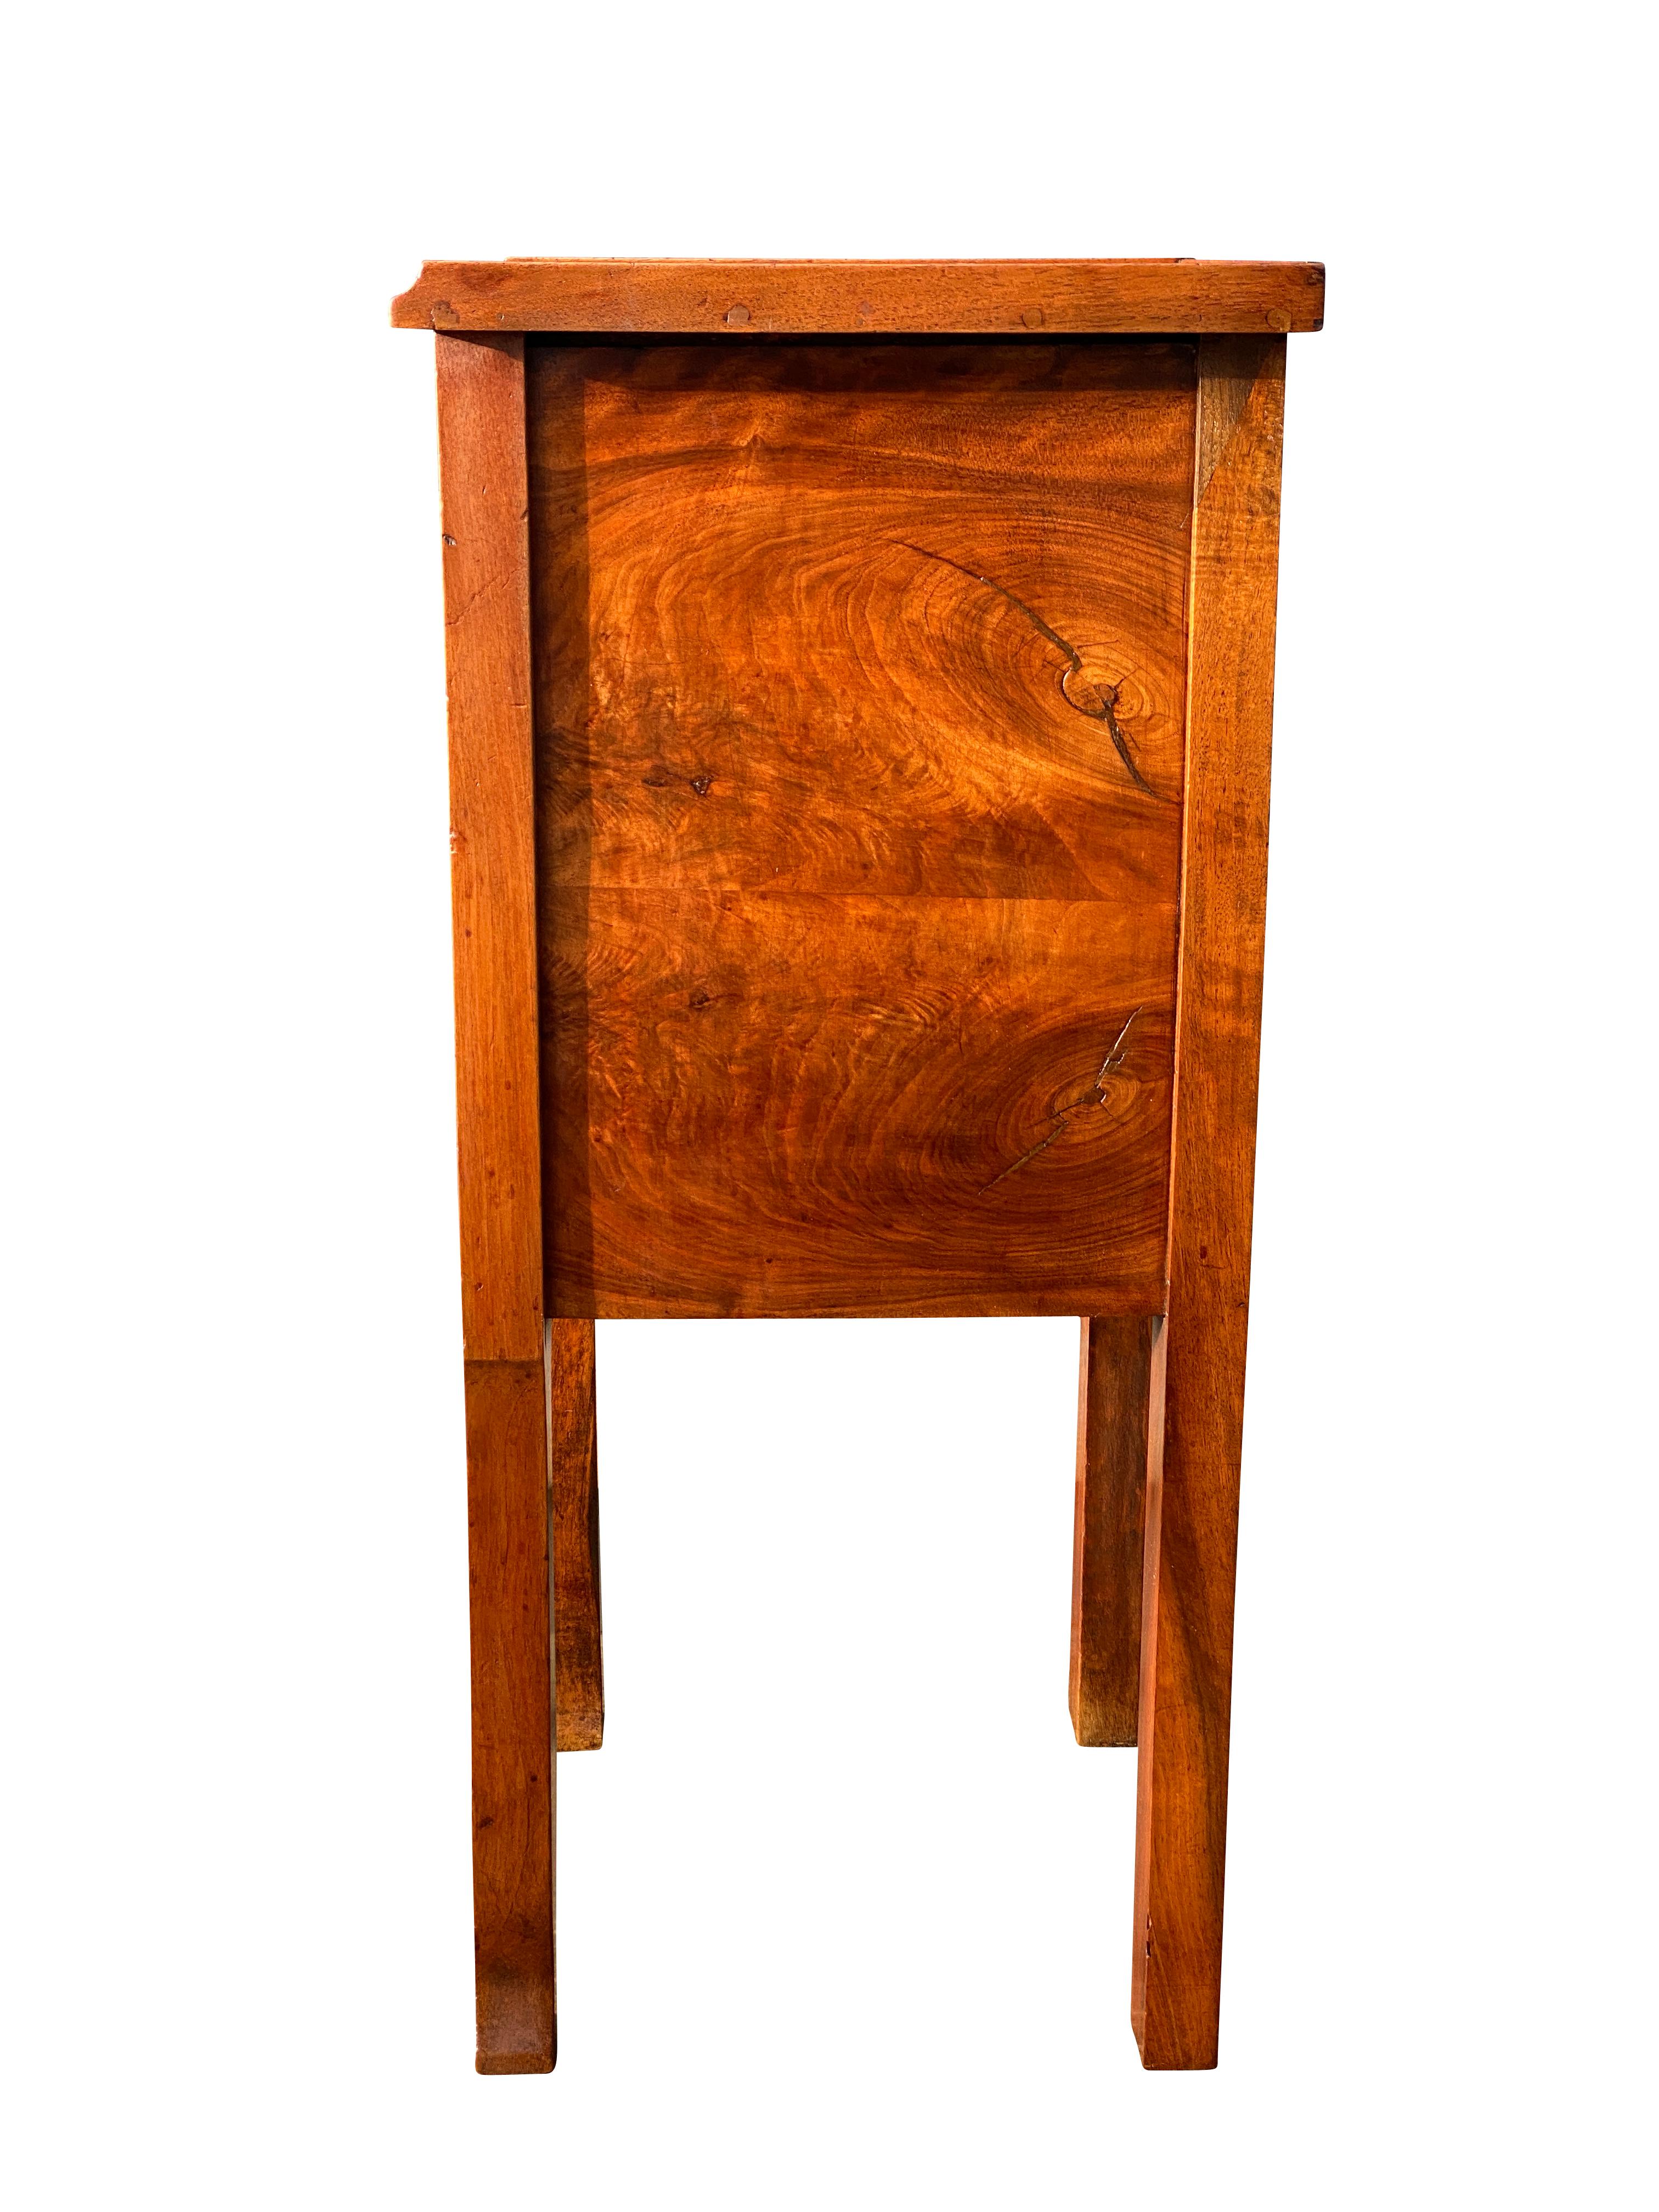 Early 19th Century Charles X Provincial Walnut Side Table